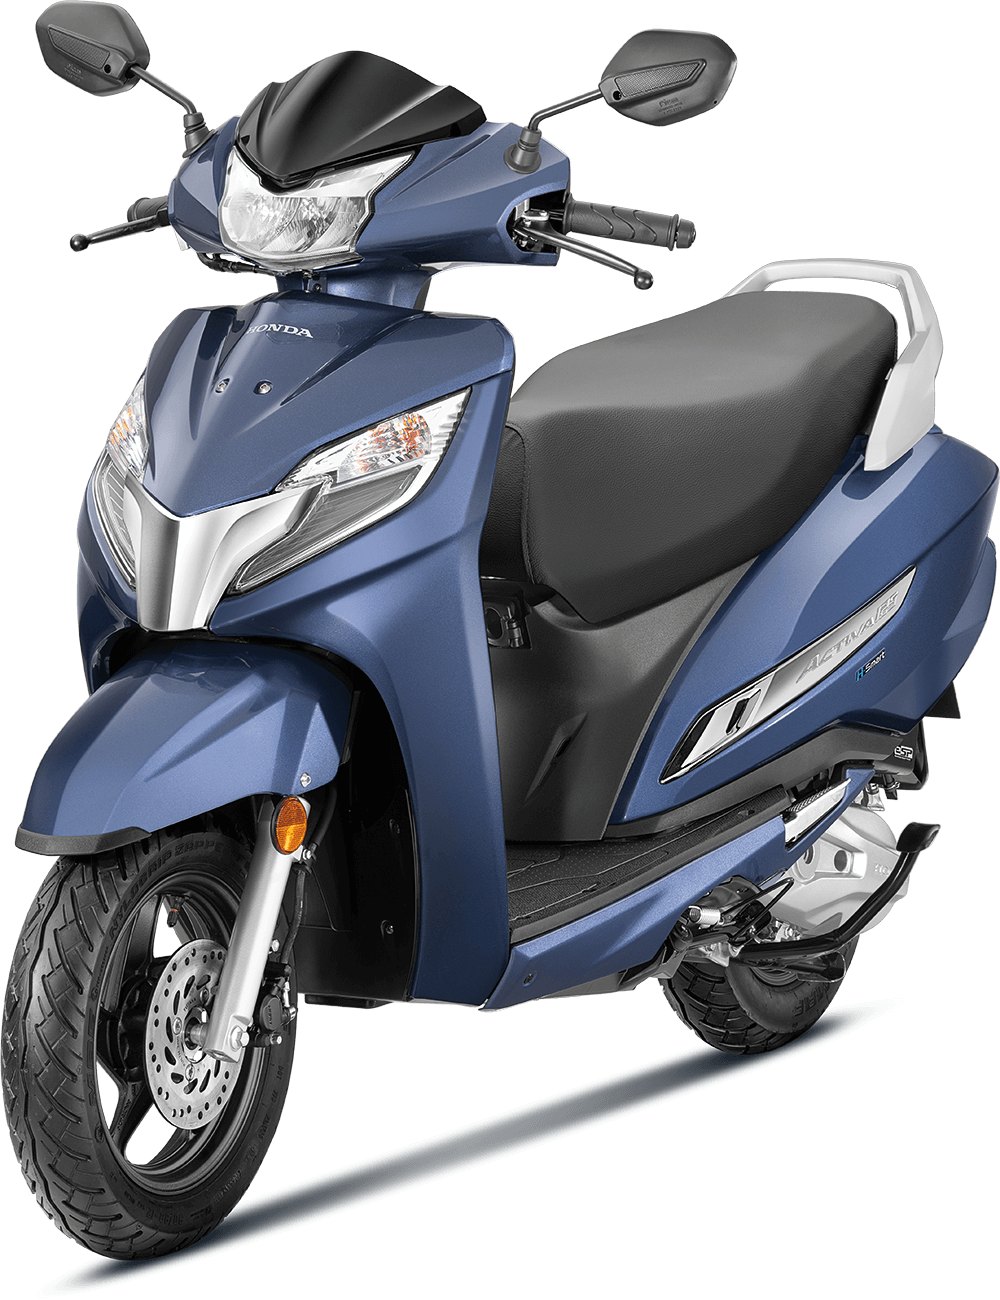 Available Mid Night Blue Metallic Honda Activa 125 OBD2 at reasonable price exclusively at Rushabh Honda, Nashik. Best Two wheeler Honda Dealers for years.